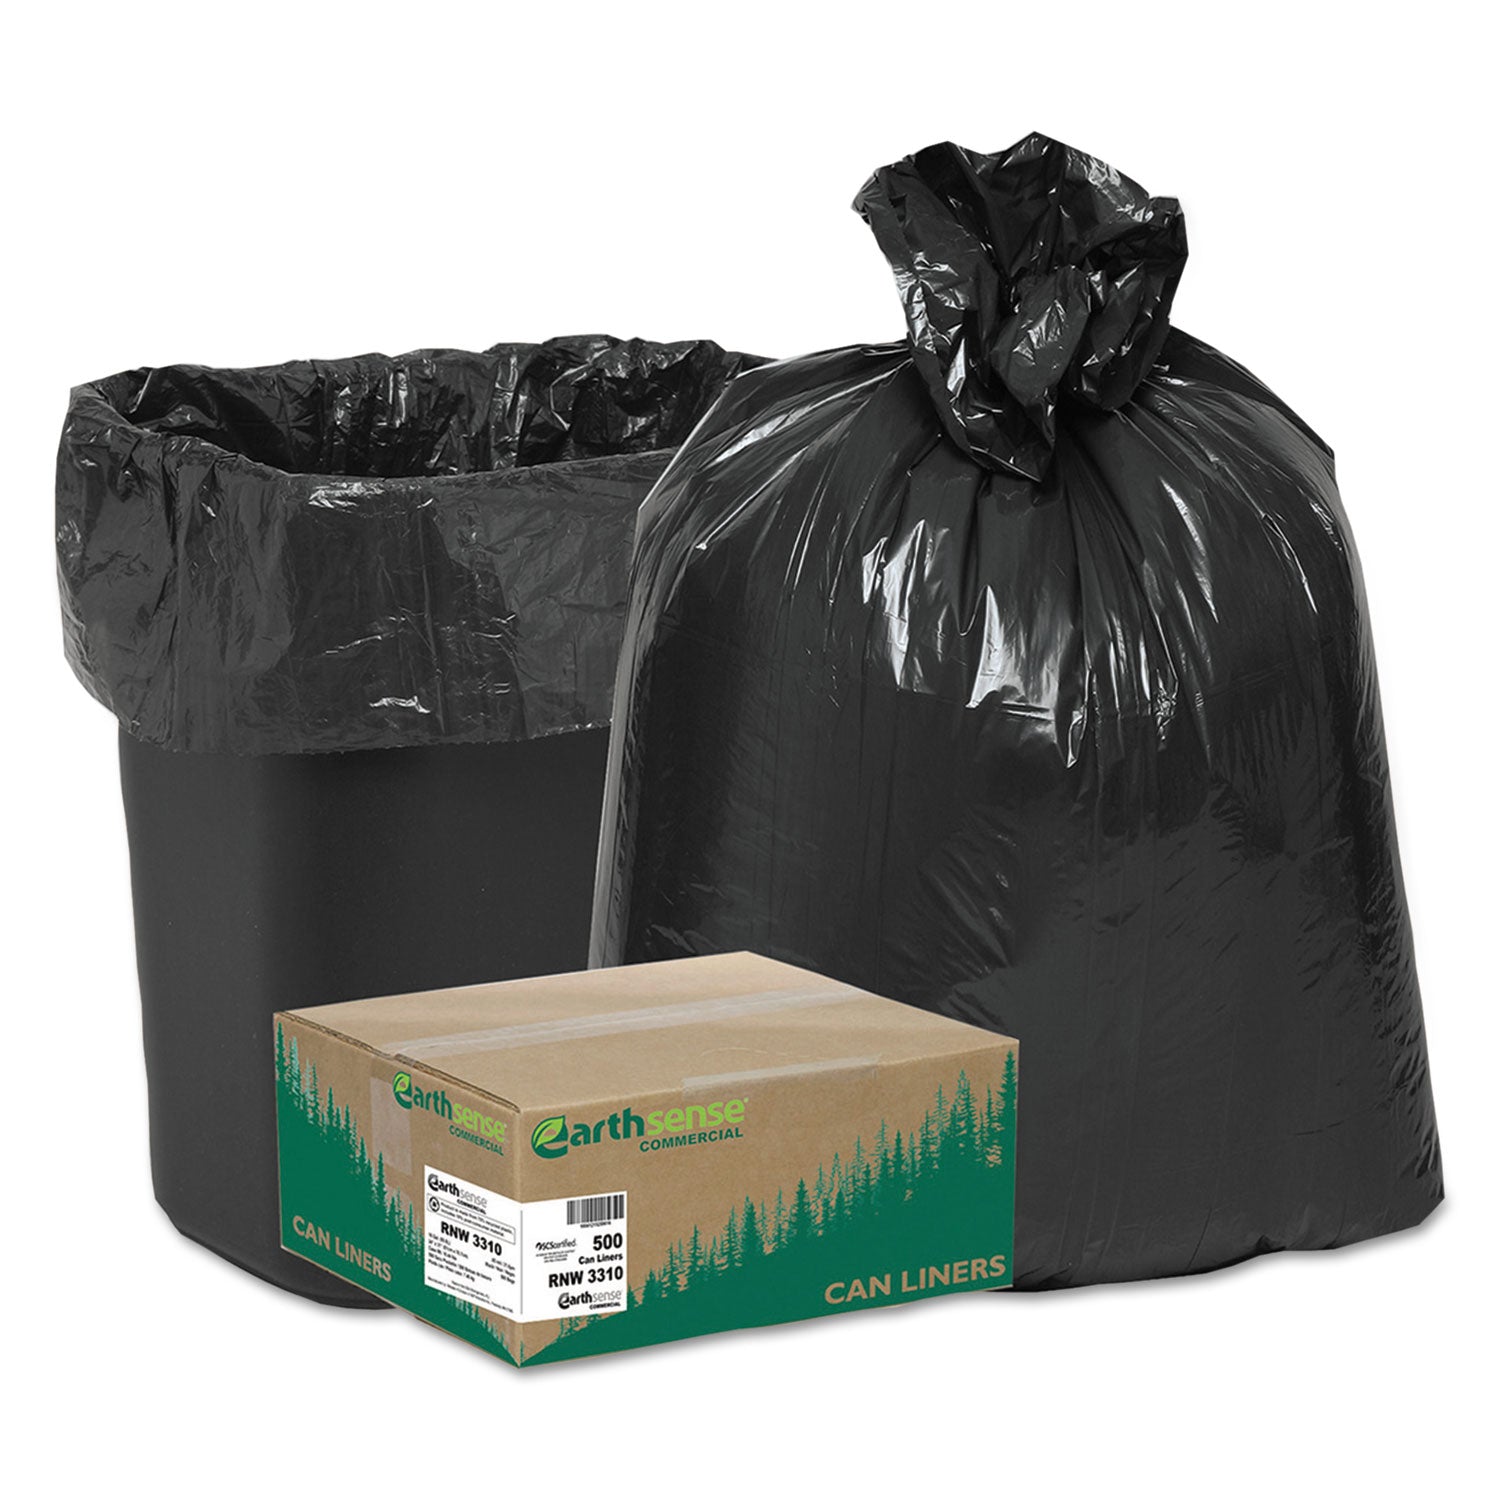 linear-low-density-recycled-can-liners-16-gal-085-mil-24-x-33-black-25-bags-roll-20-rolls-carton_wbirnw3310 - 1